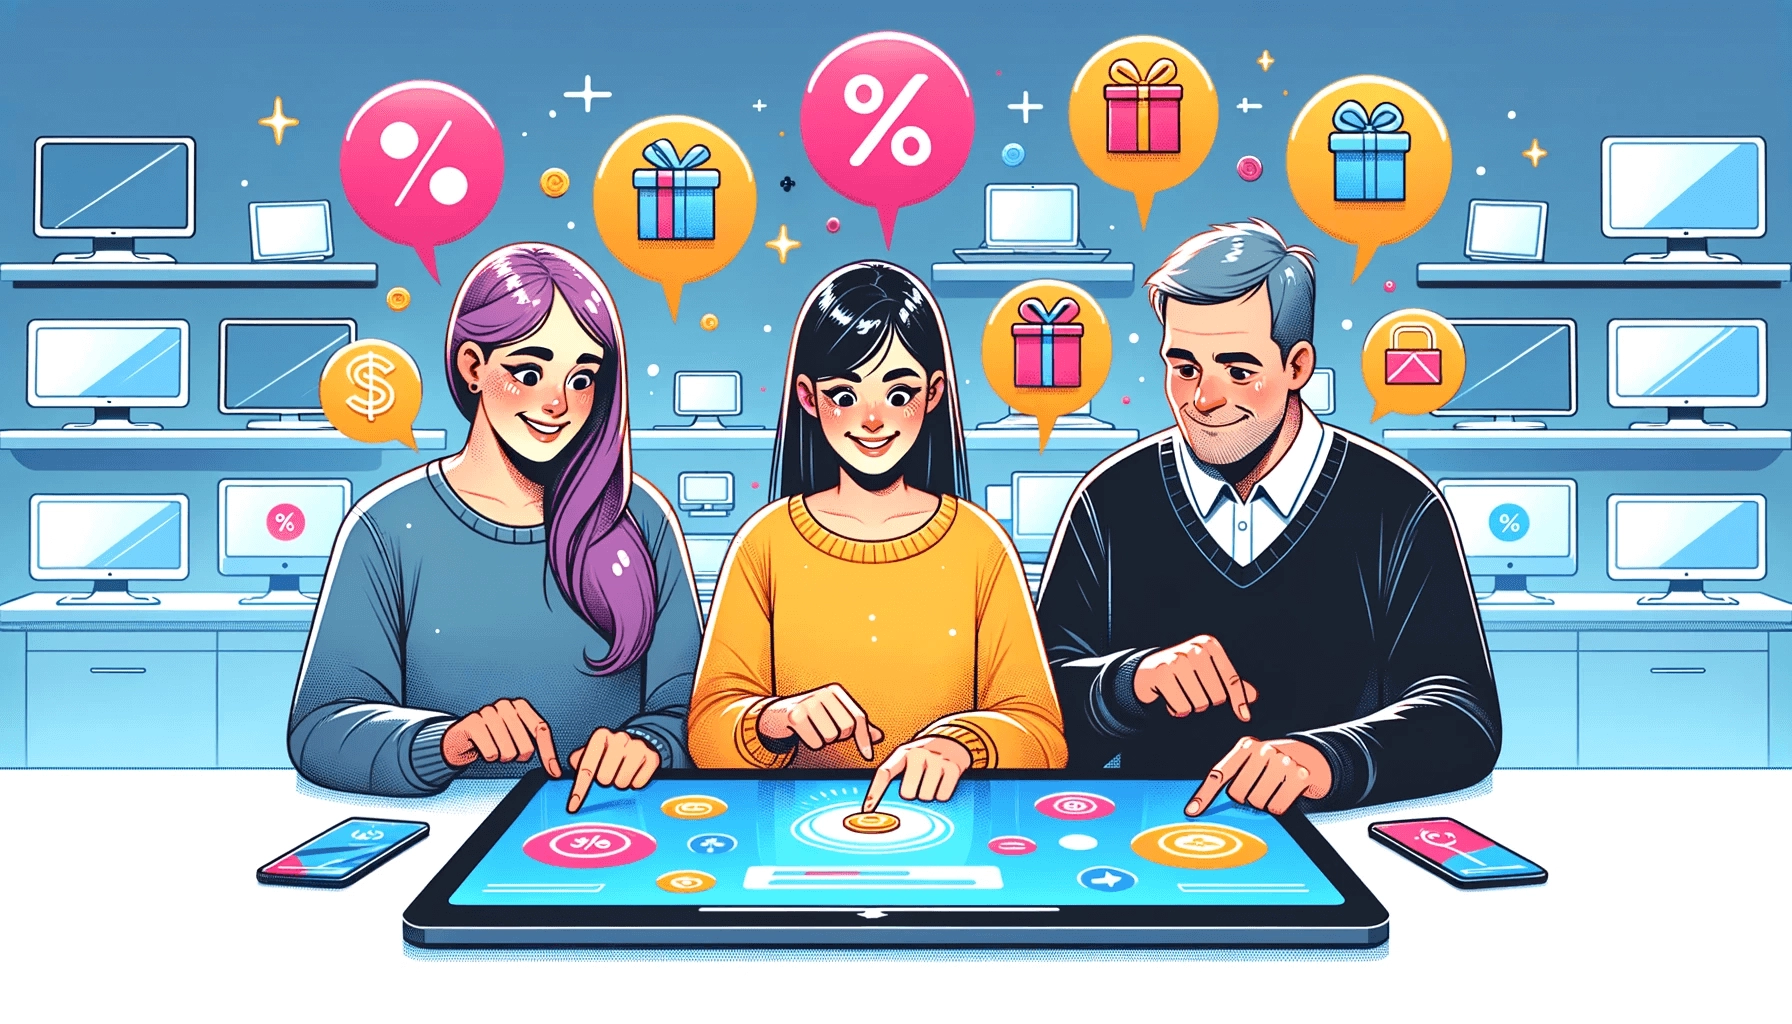 Illustration of individuals in a retail store playing a collaborative reward game